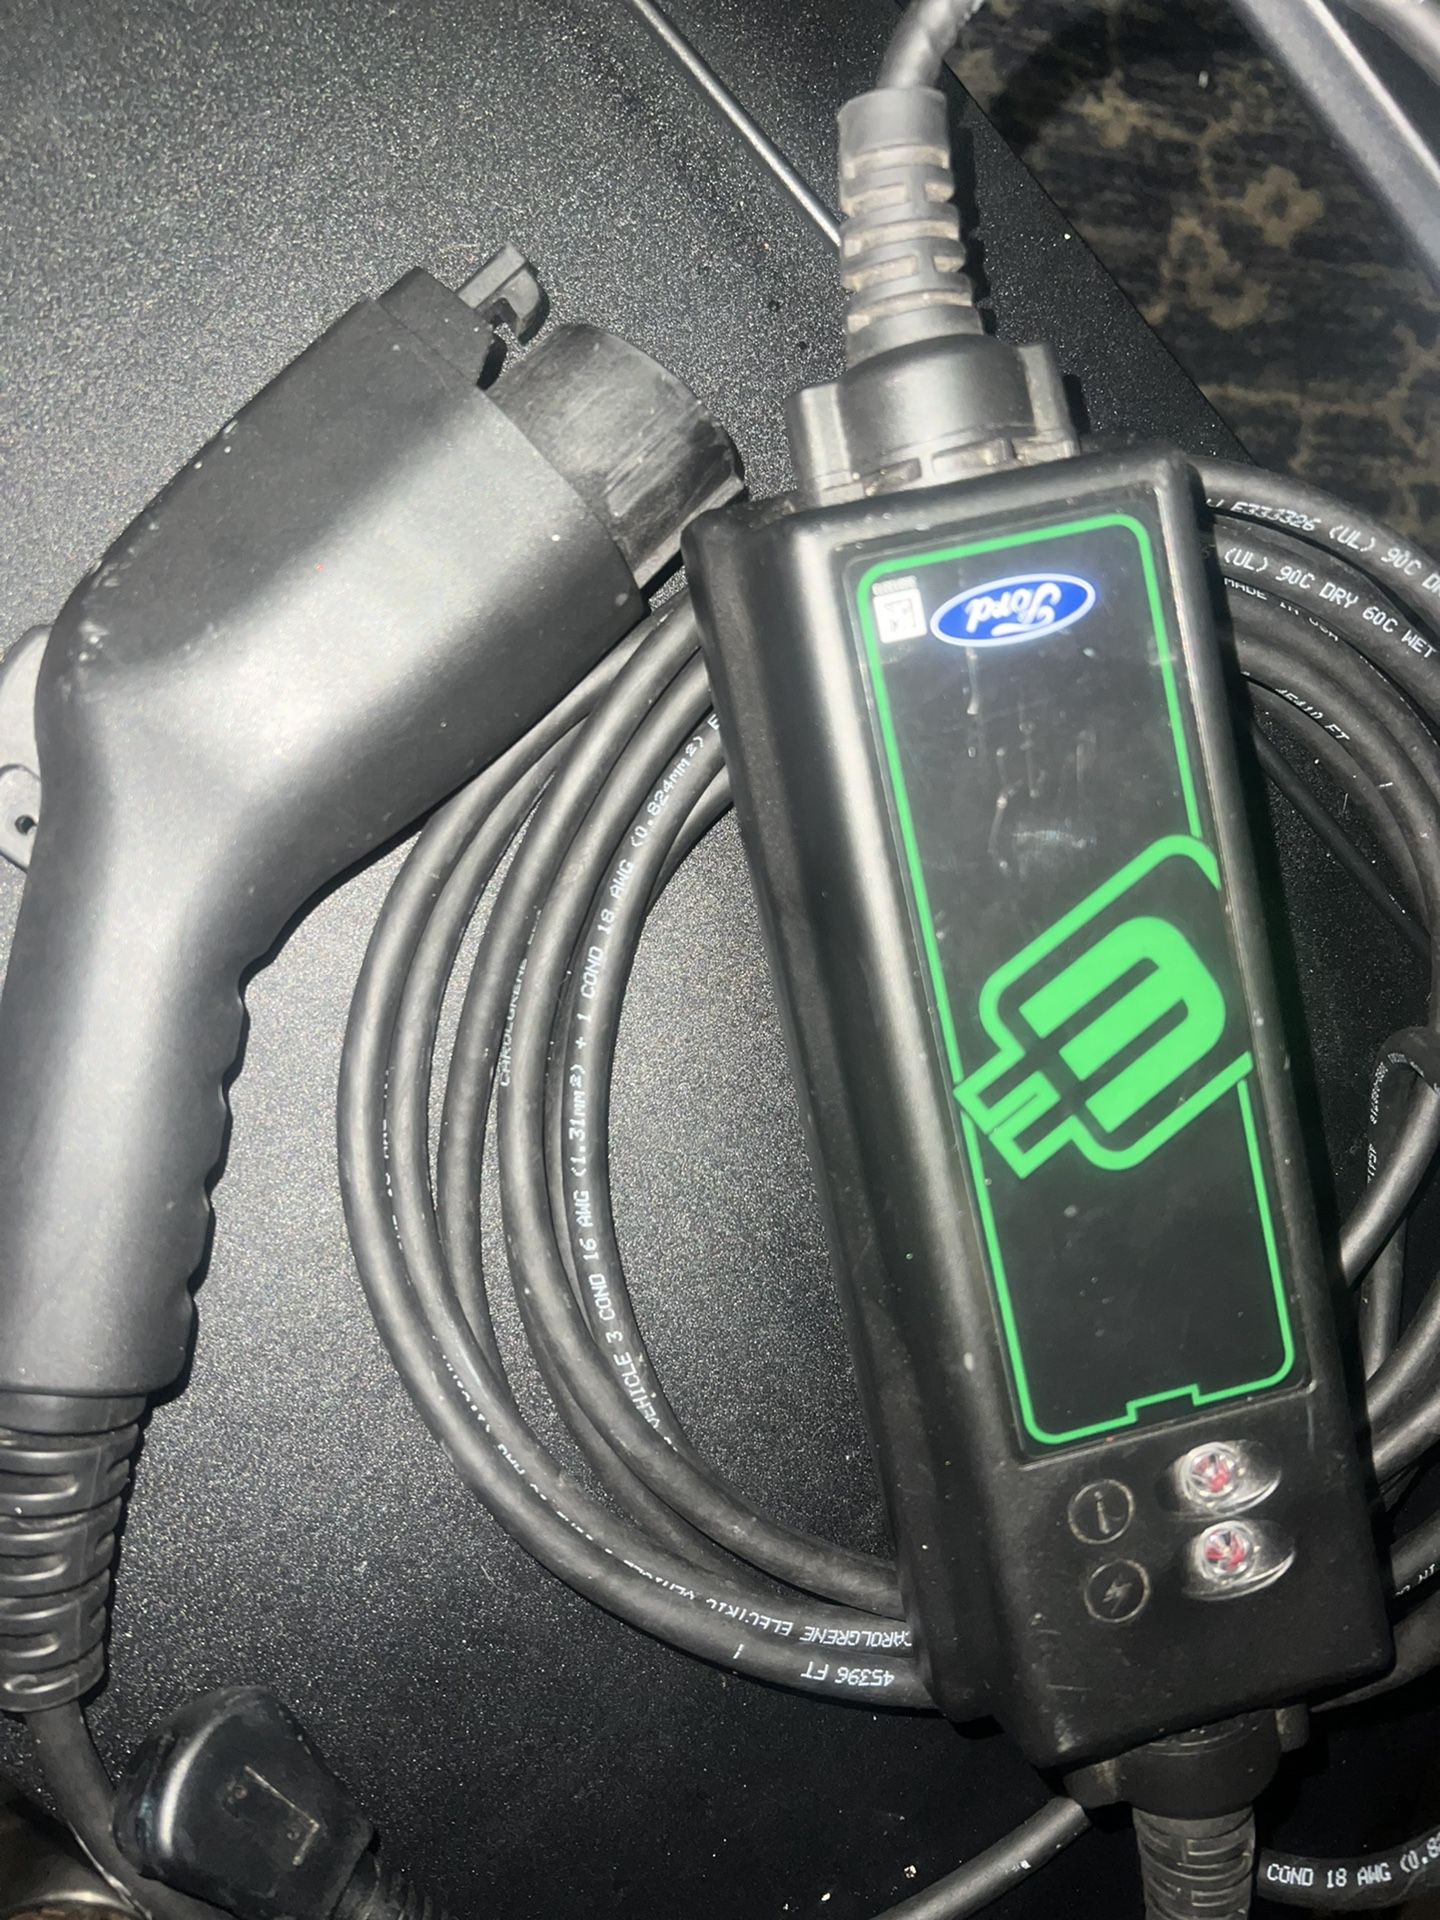 Brand New Ford Electric Car Charger